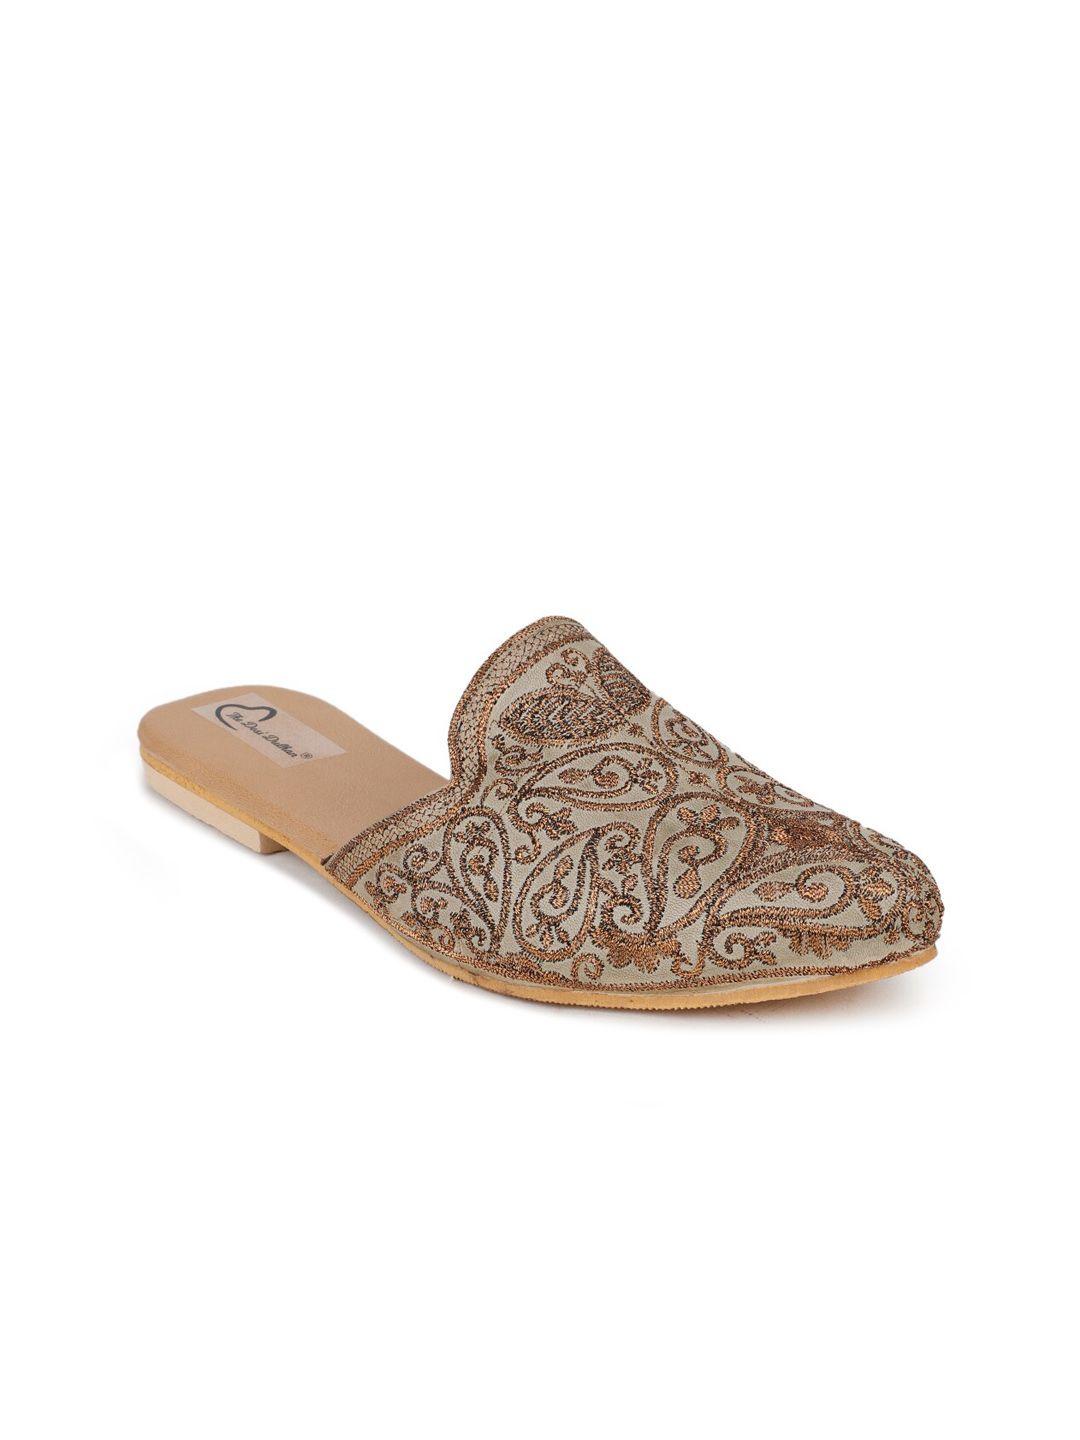 the-desi-dulhan-women-grey-embroidered-leather-ethnic-mule-flat